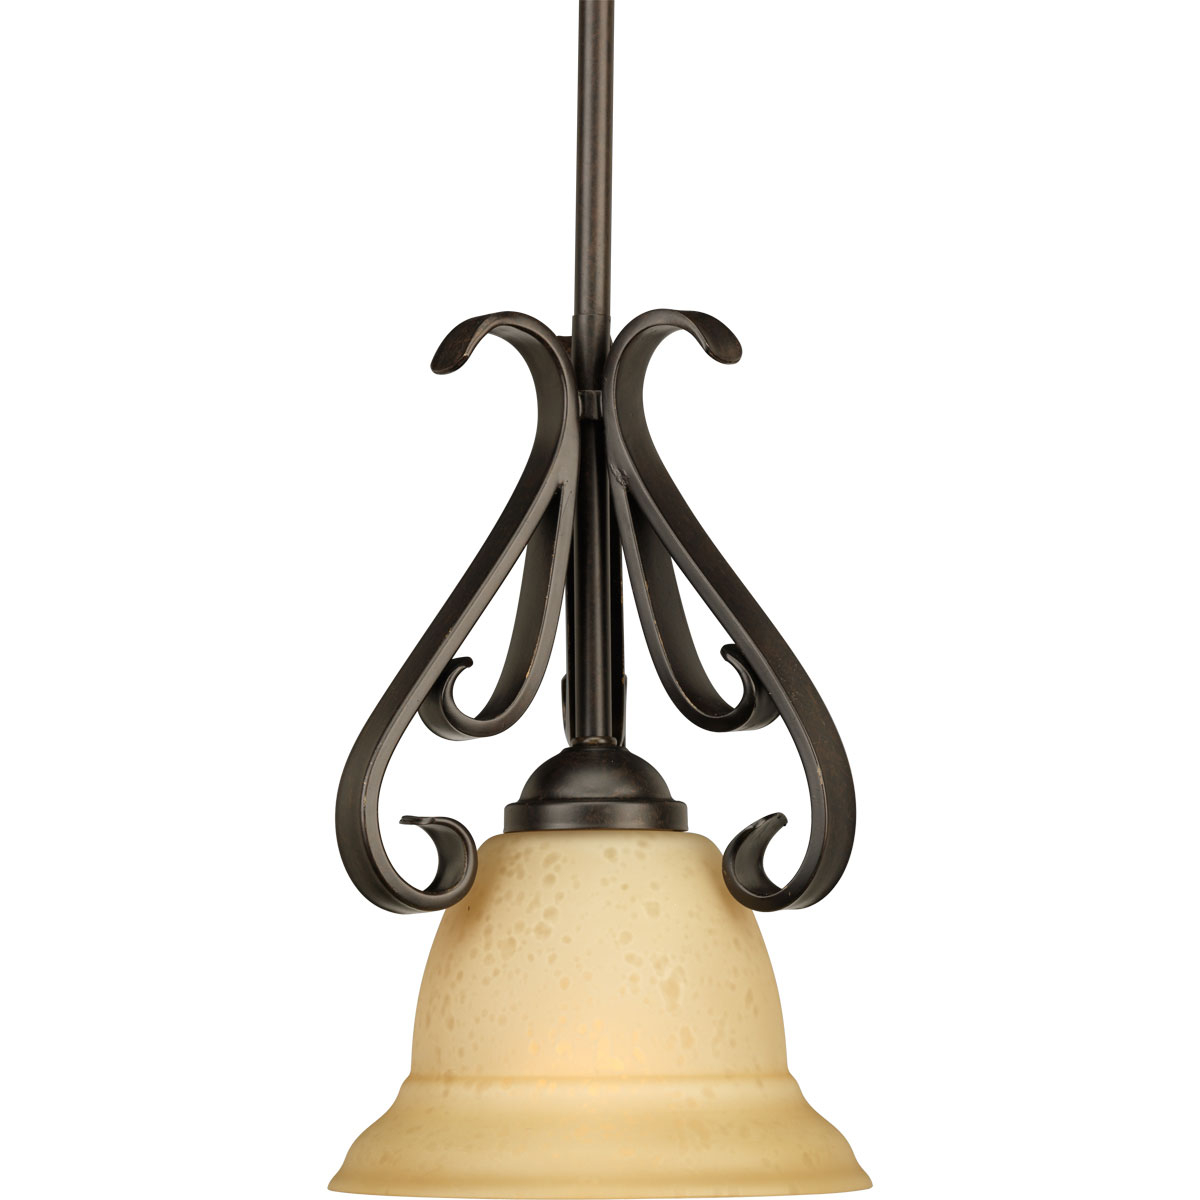 One-light stem-hung mini-pendant with tea stained oversized, bell-shaped glass bowl. Distinctive ebbing and flowing of squared scrolls and arms in Forged Bronze finish.